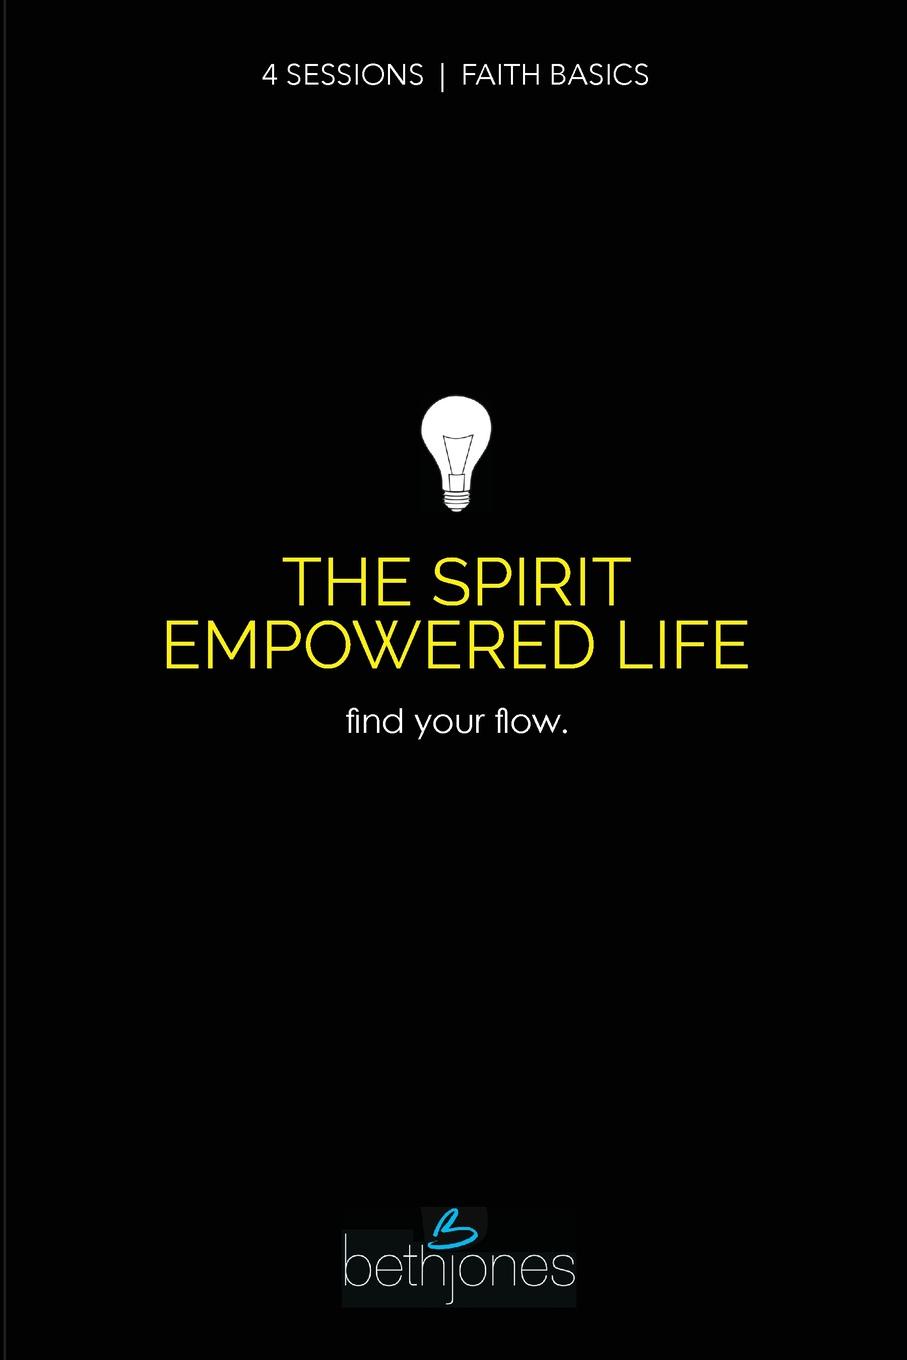 Faith Basics on the Spirit Empowered Life. Find Your Flow